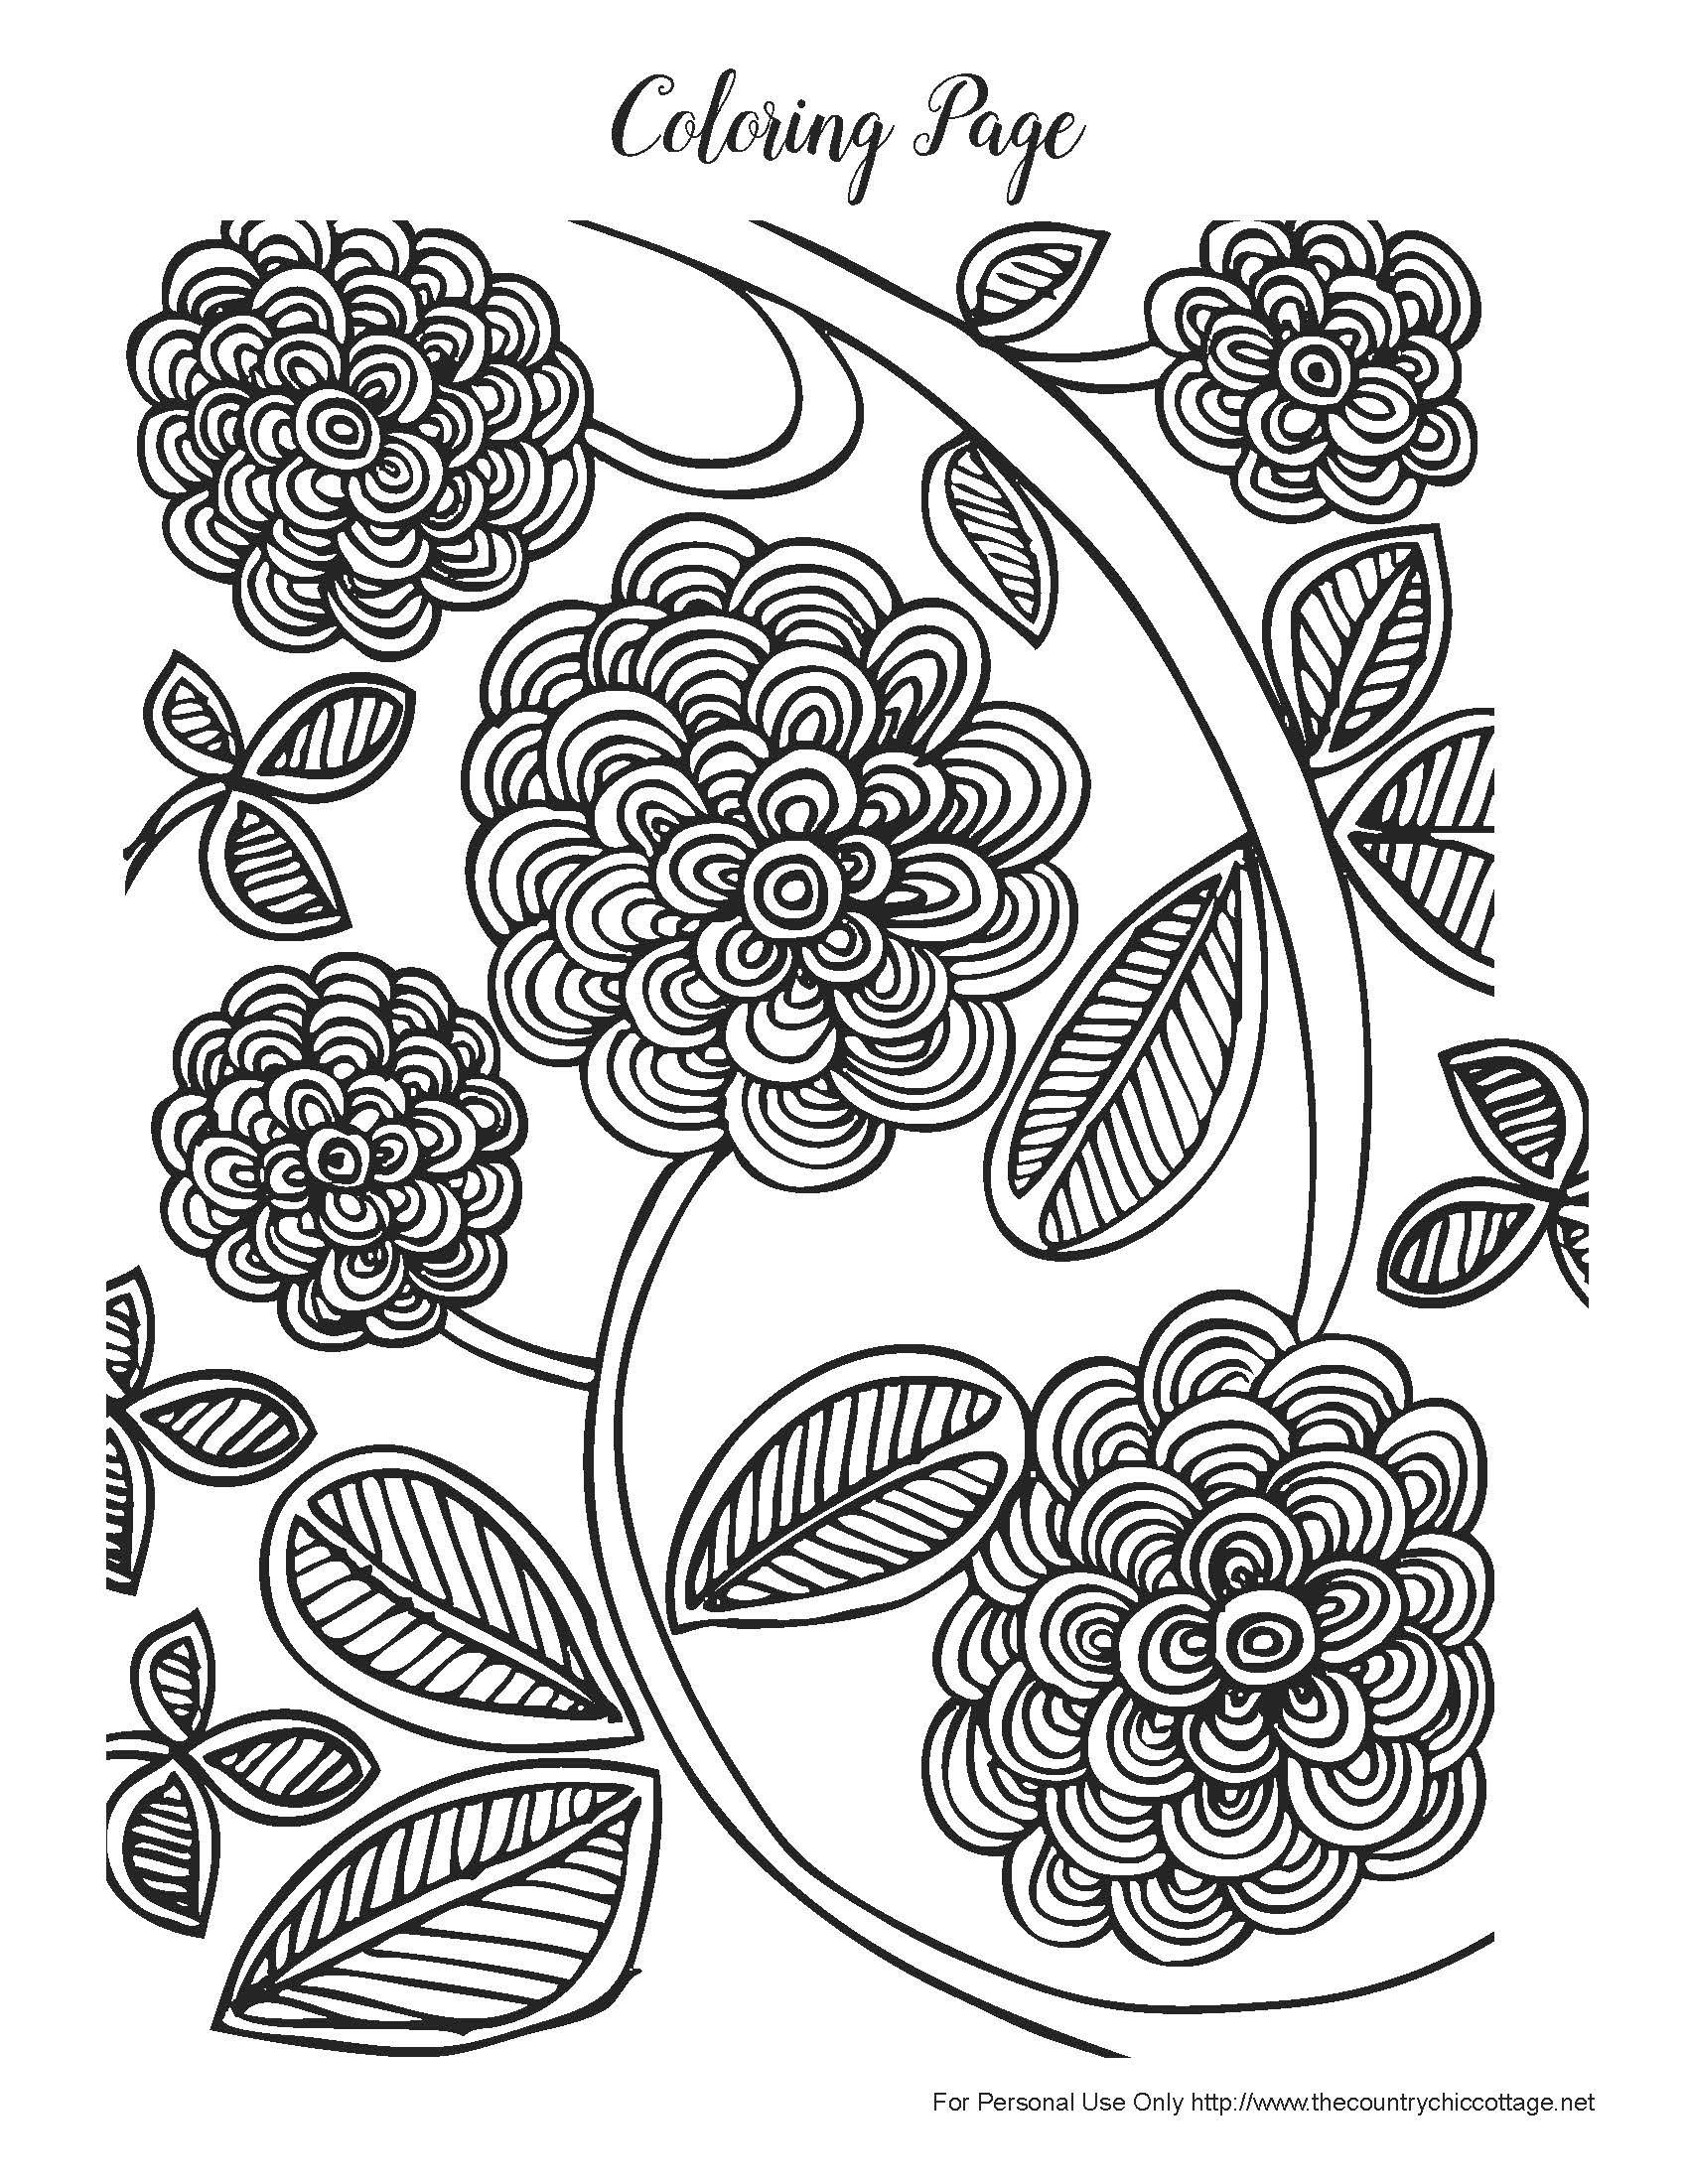 Free Spring Coloring Pages For Adults | Products I Love | Pinterest - Free Printable Spring Coloring Pages For Adults